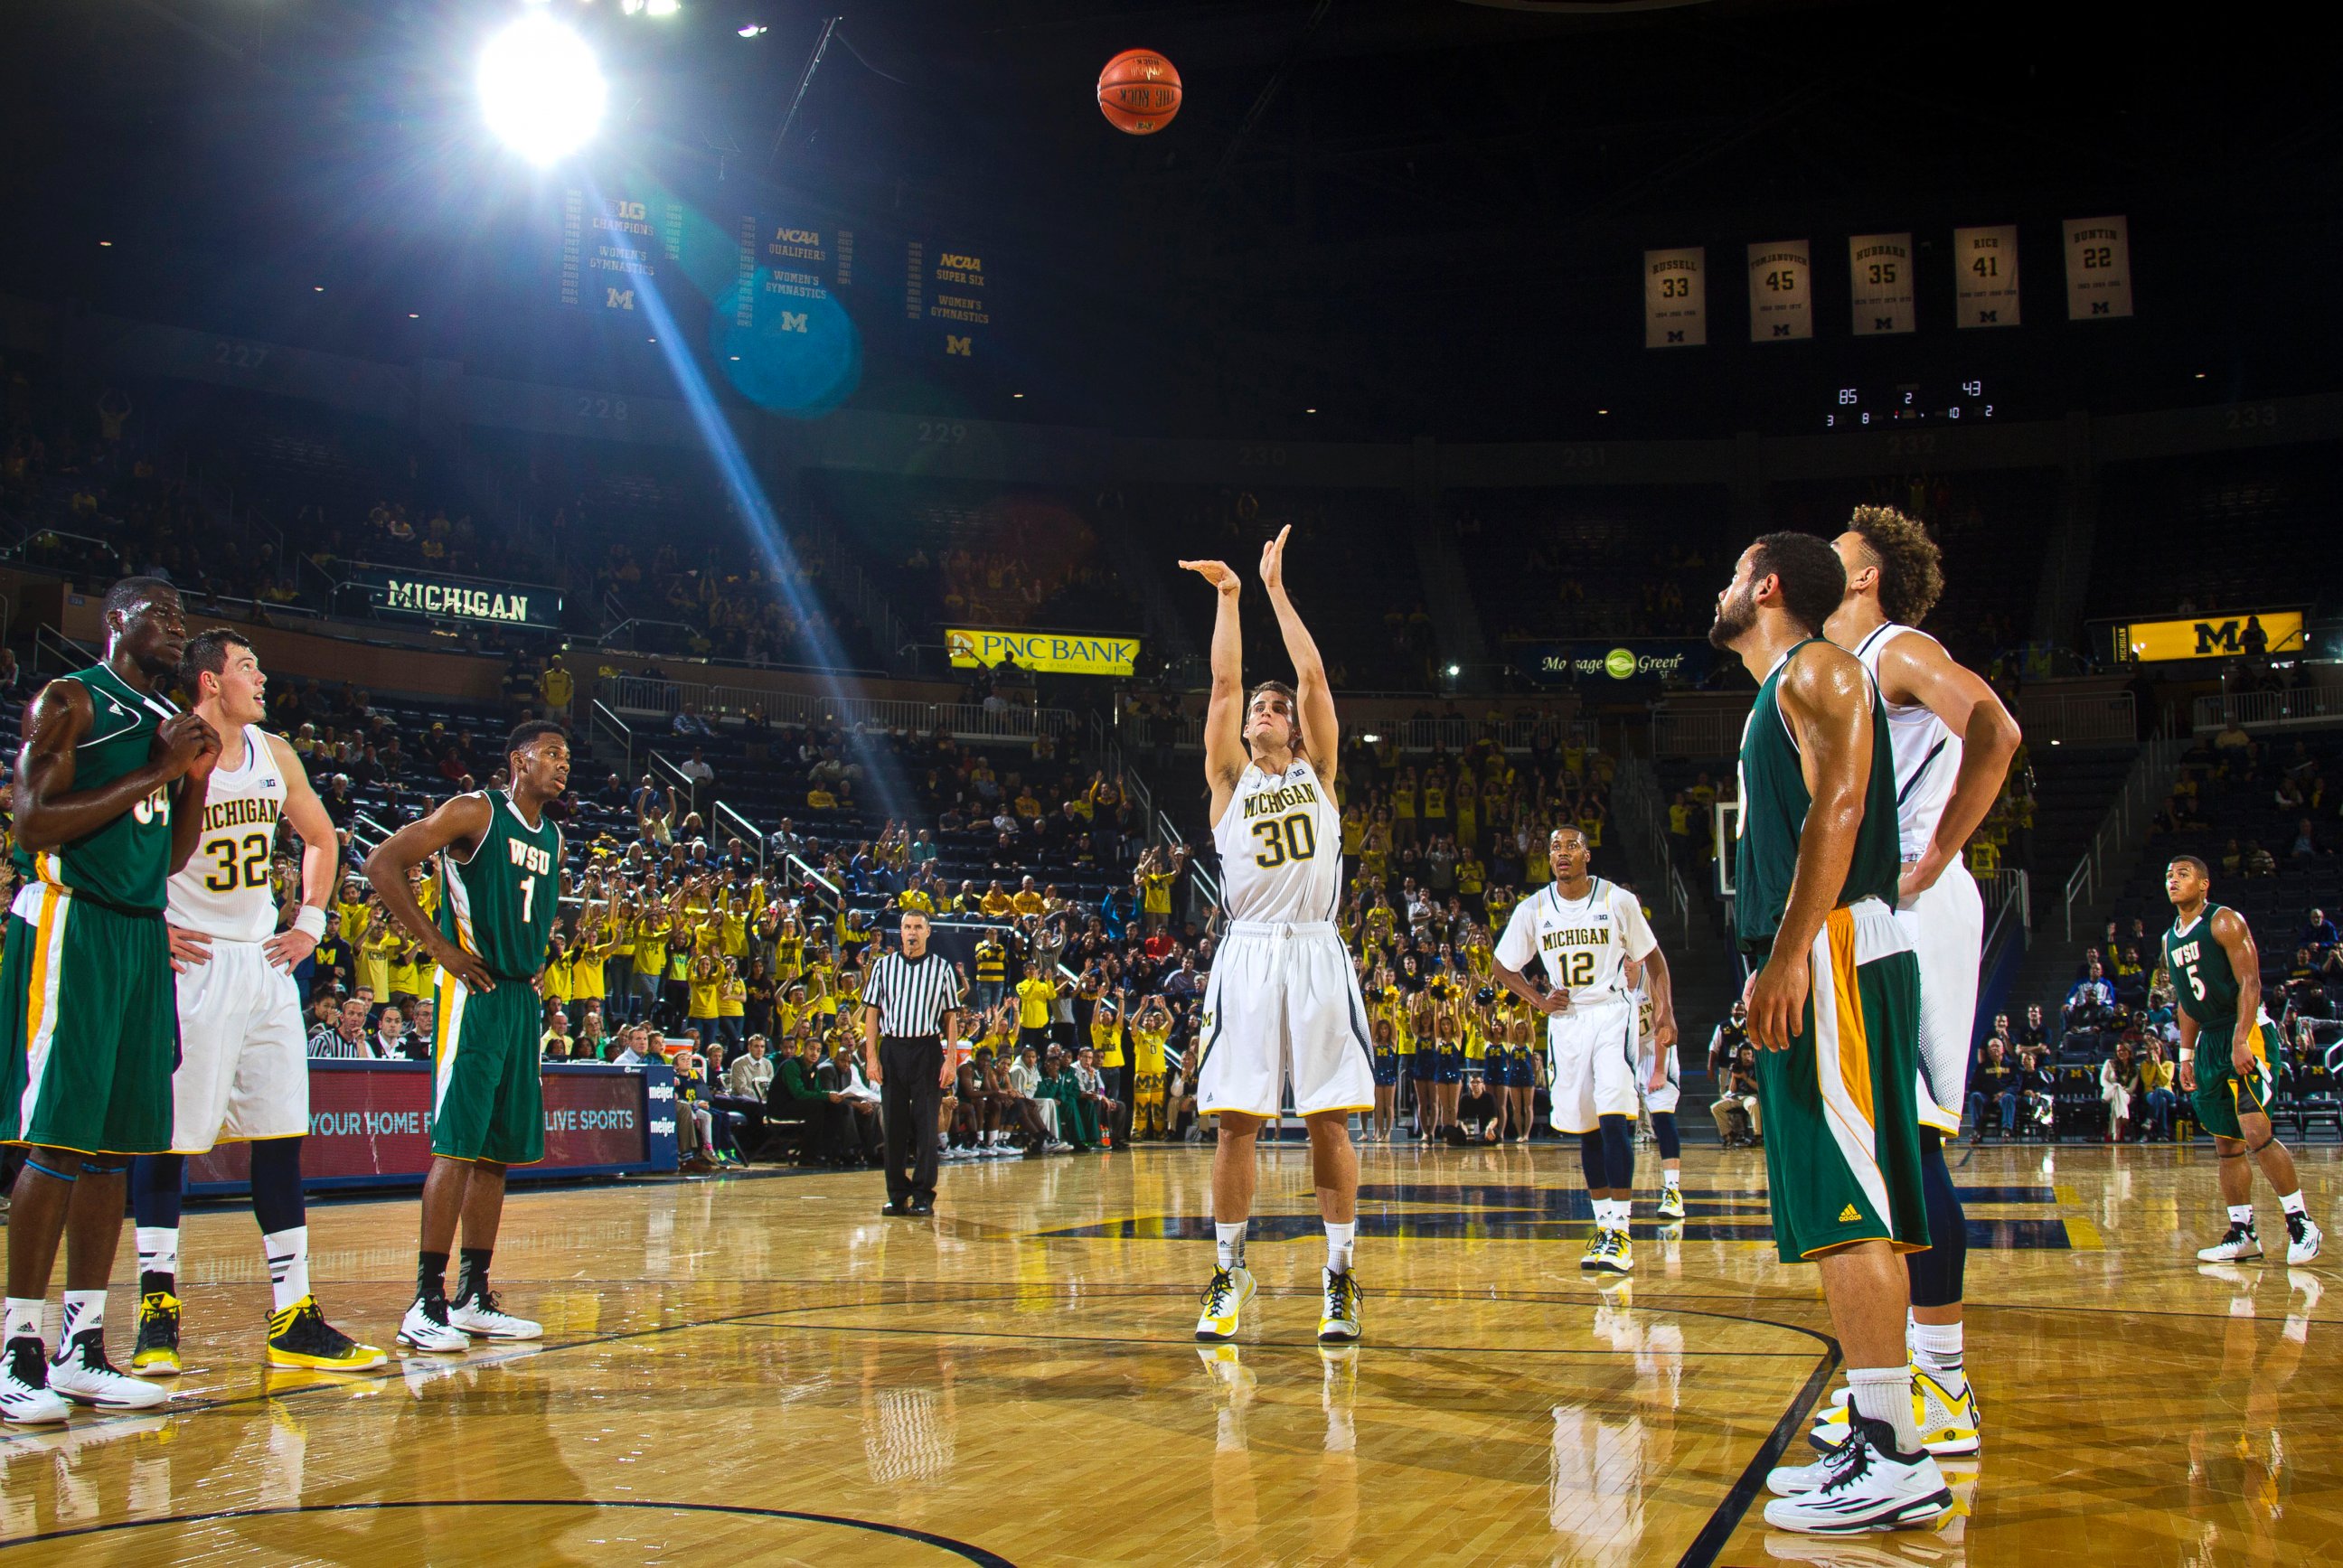 Michigan guard Austin Hatch makes a free throw in the second half of an NCAA college basketball exhibition game against Wayne State at Crisler Center in Ann Arbor, Mich., Nov. 10, 2014.